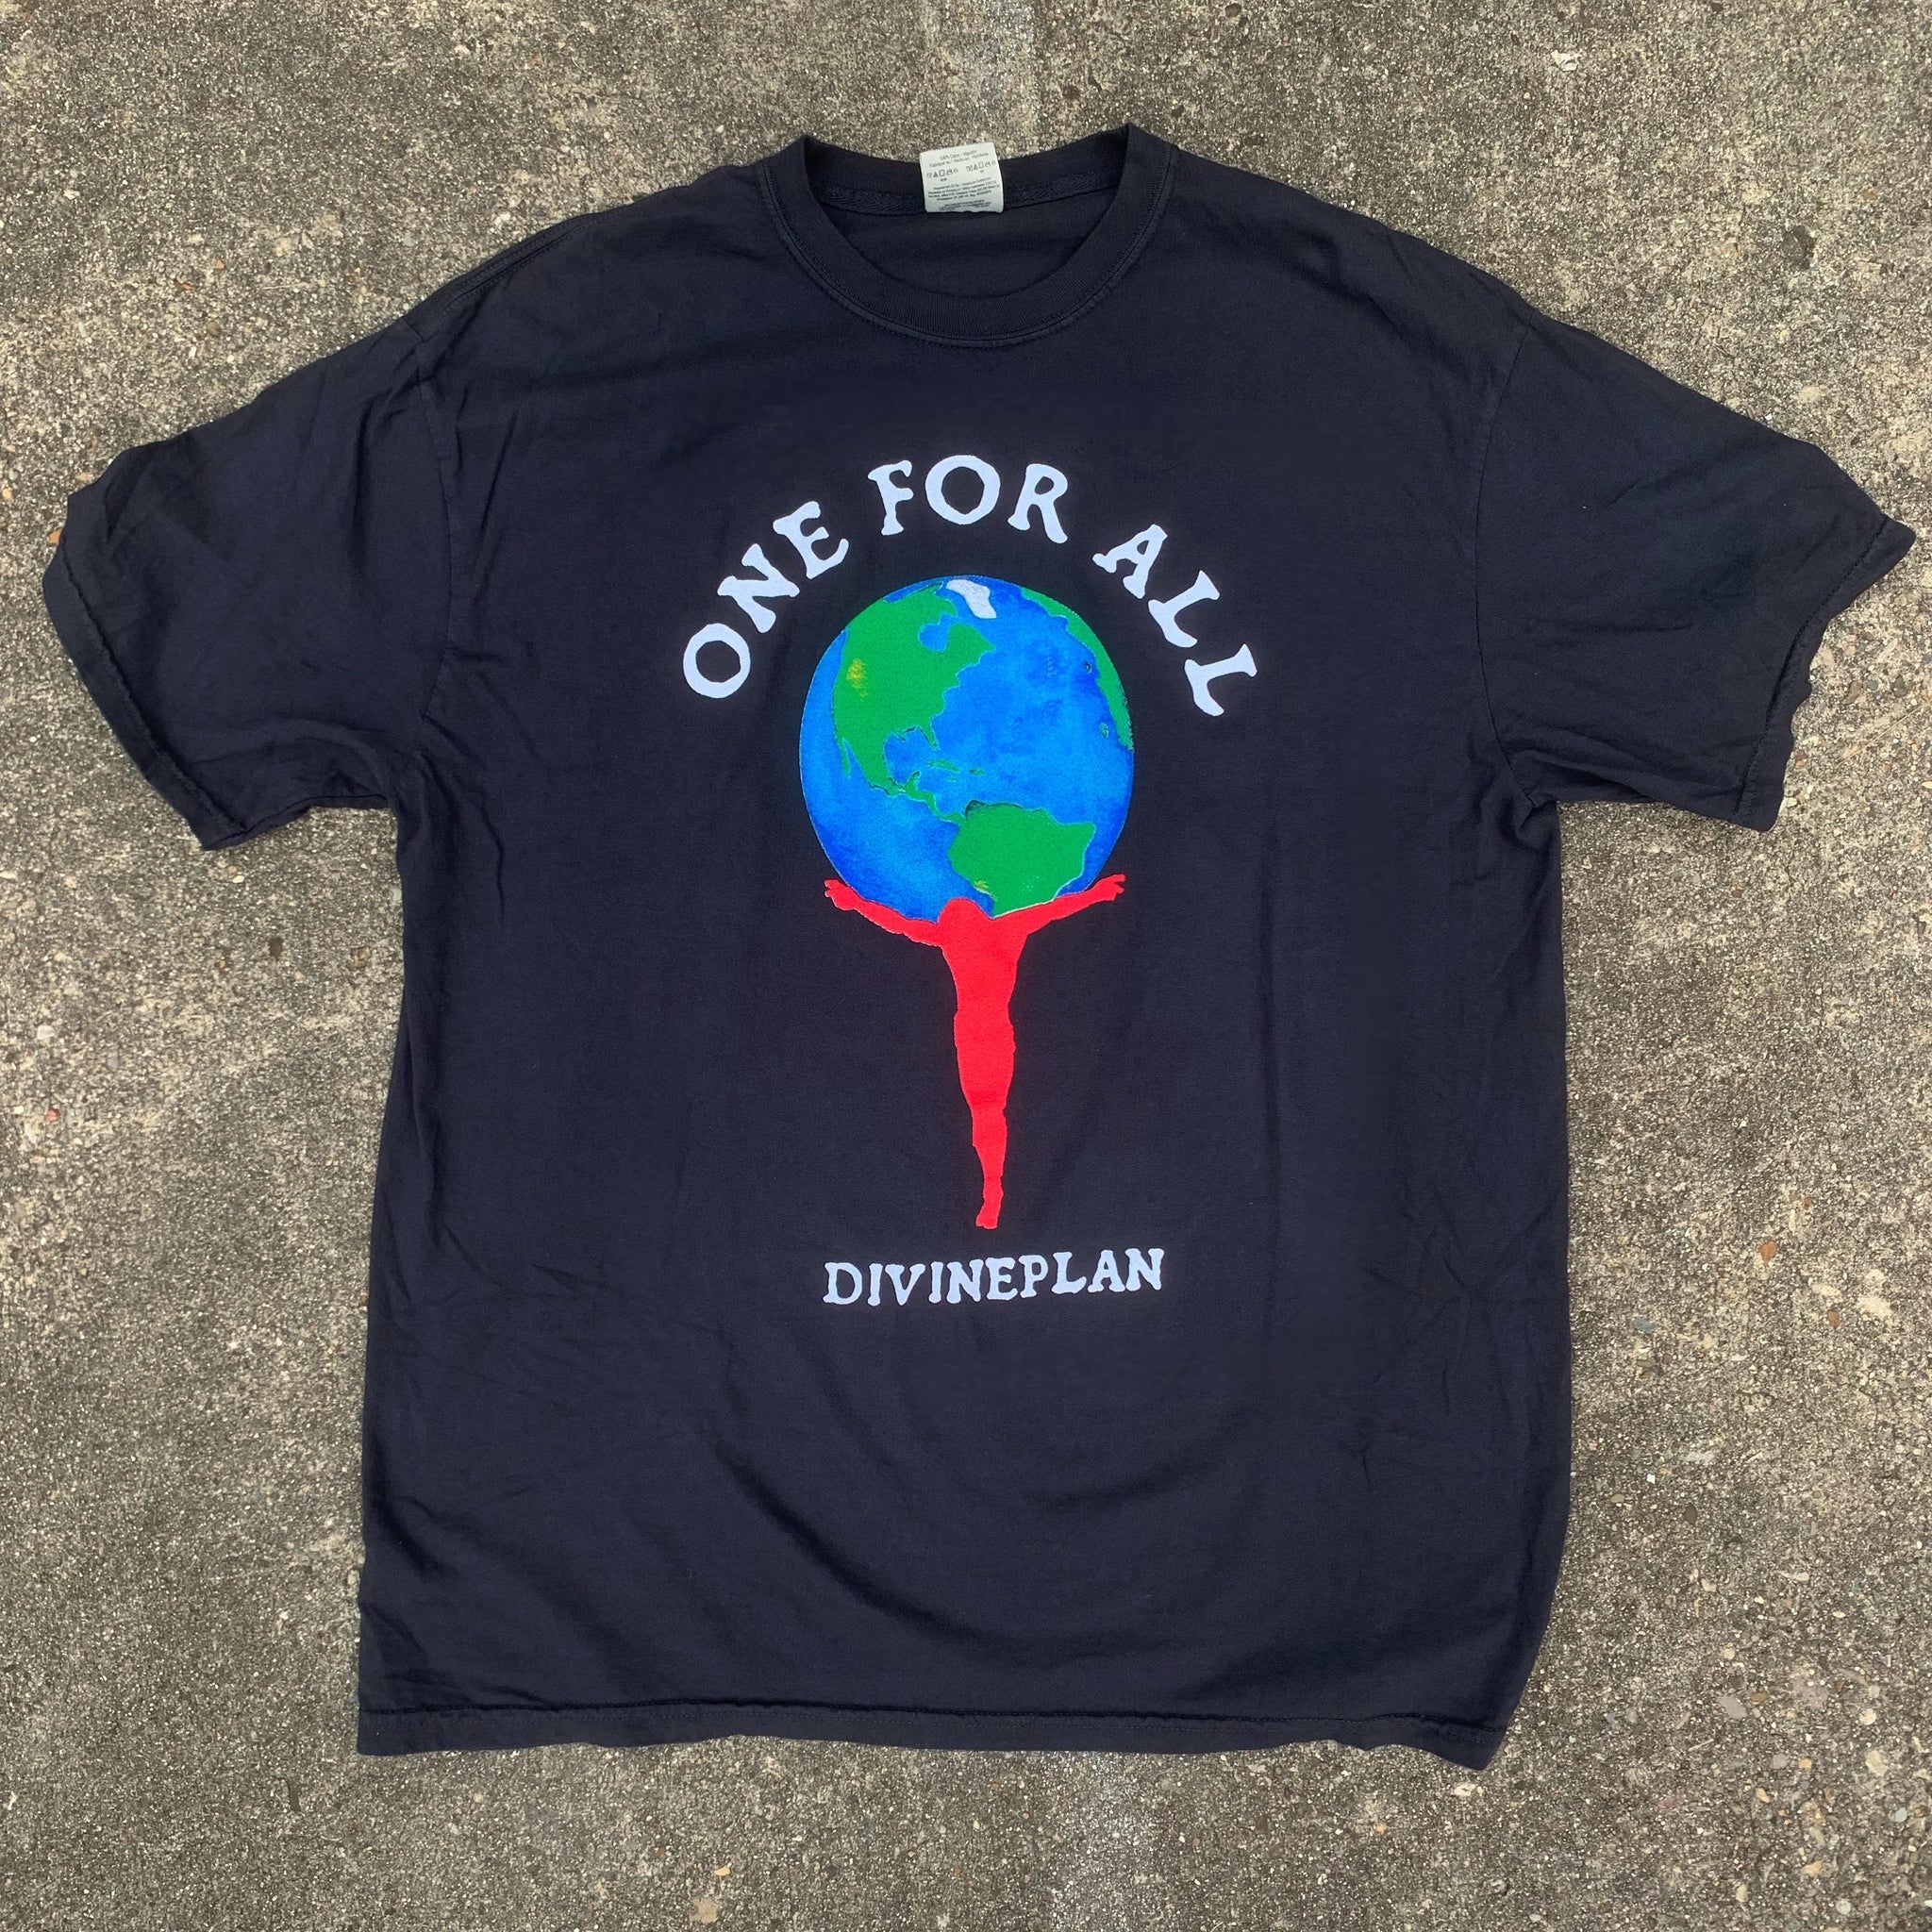 “ONE FOR ALL” T-shirt